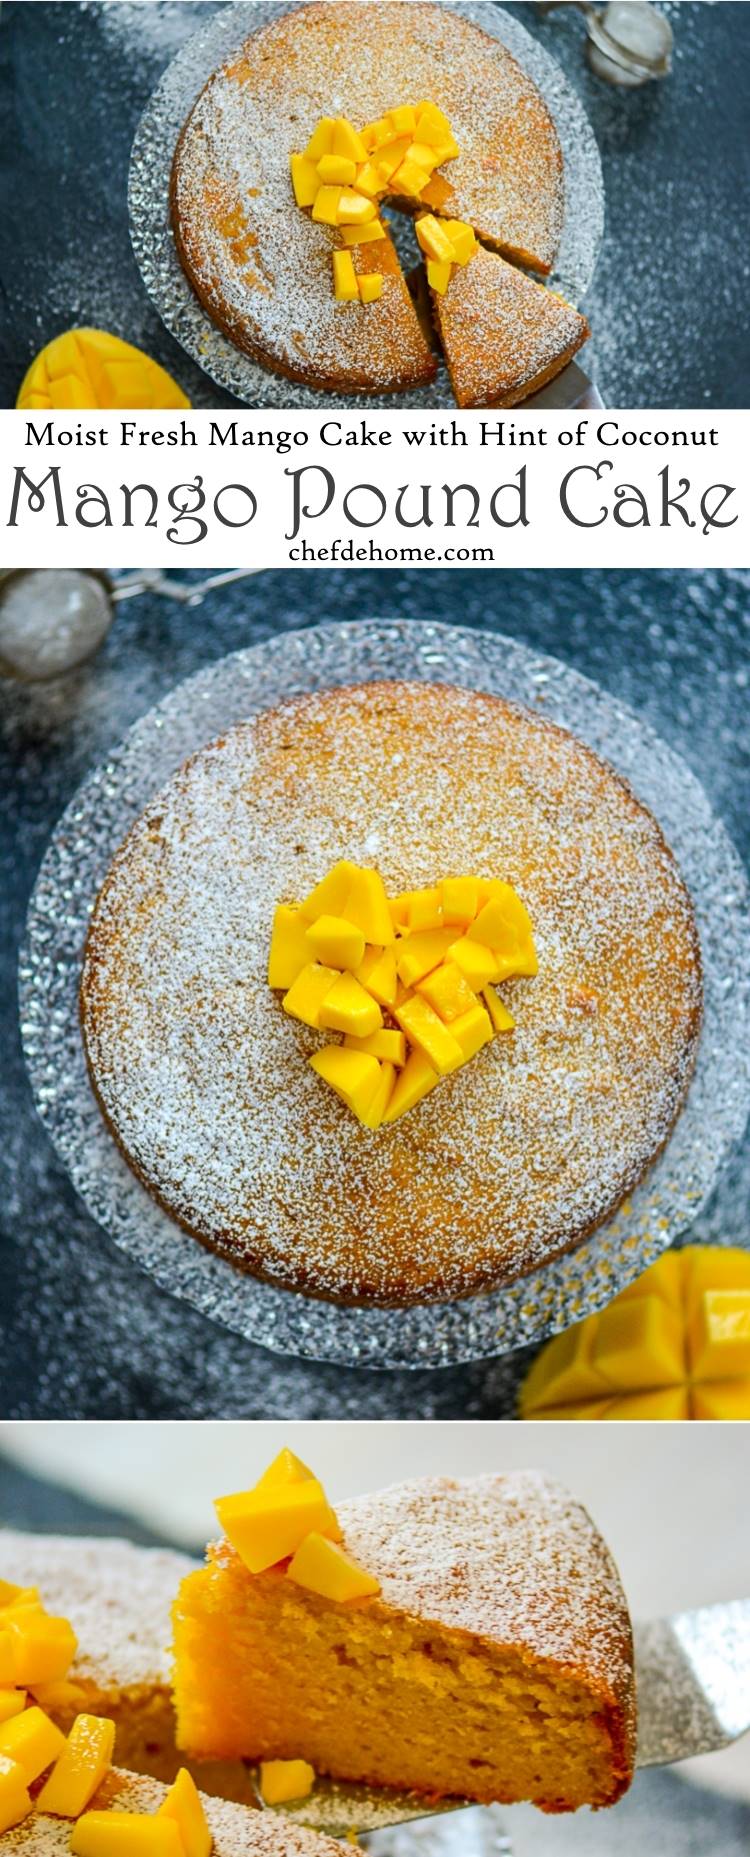 Homemade Rich and Moist Coconut and Mango Pound Cake | chefdehome.com